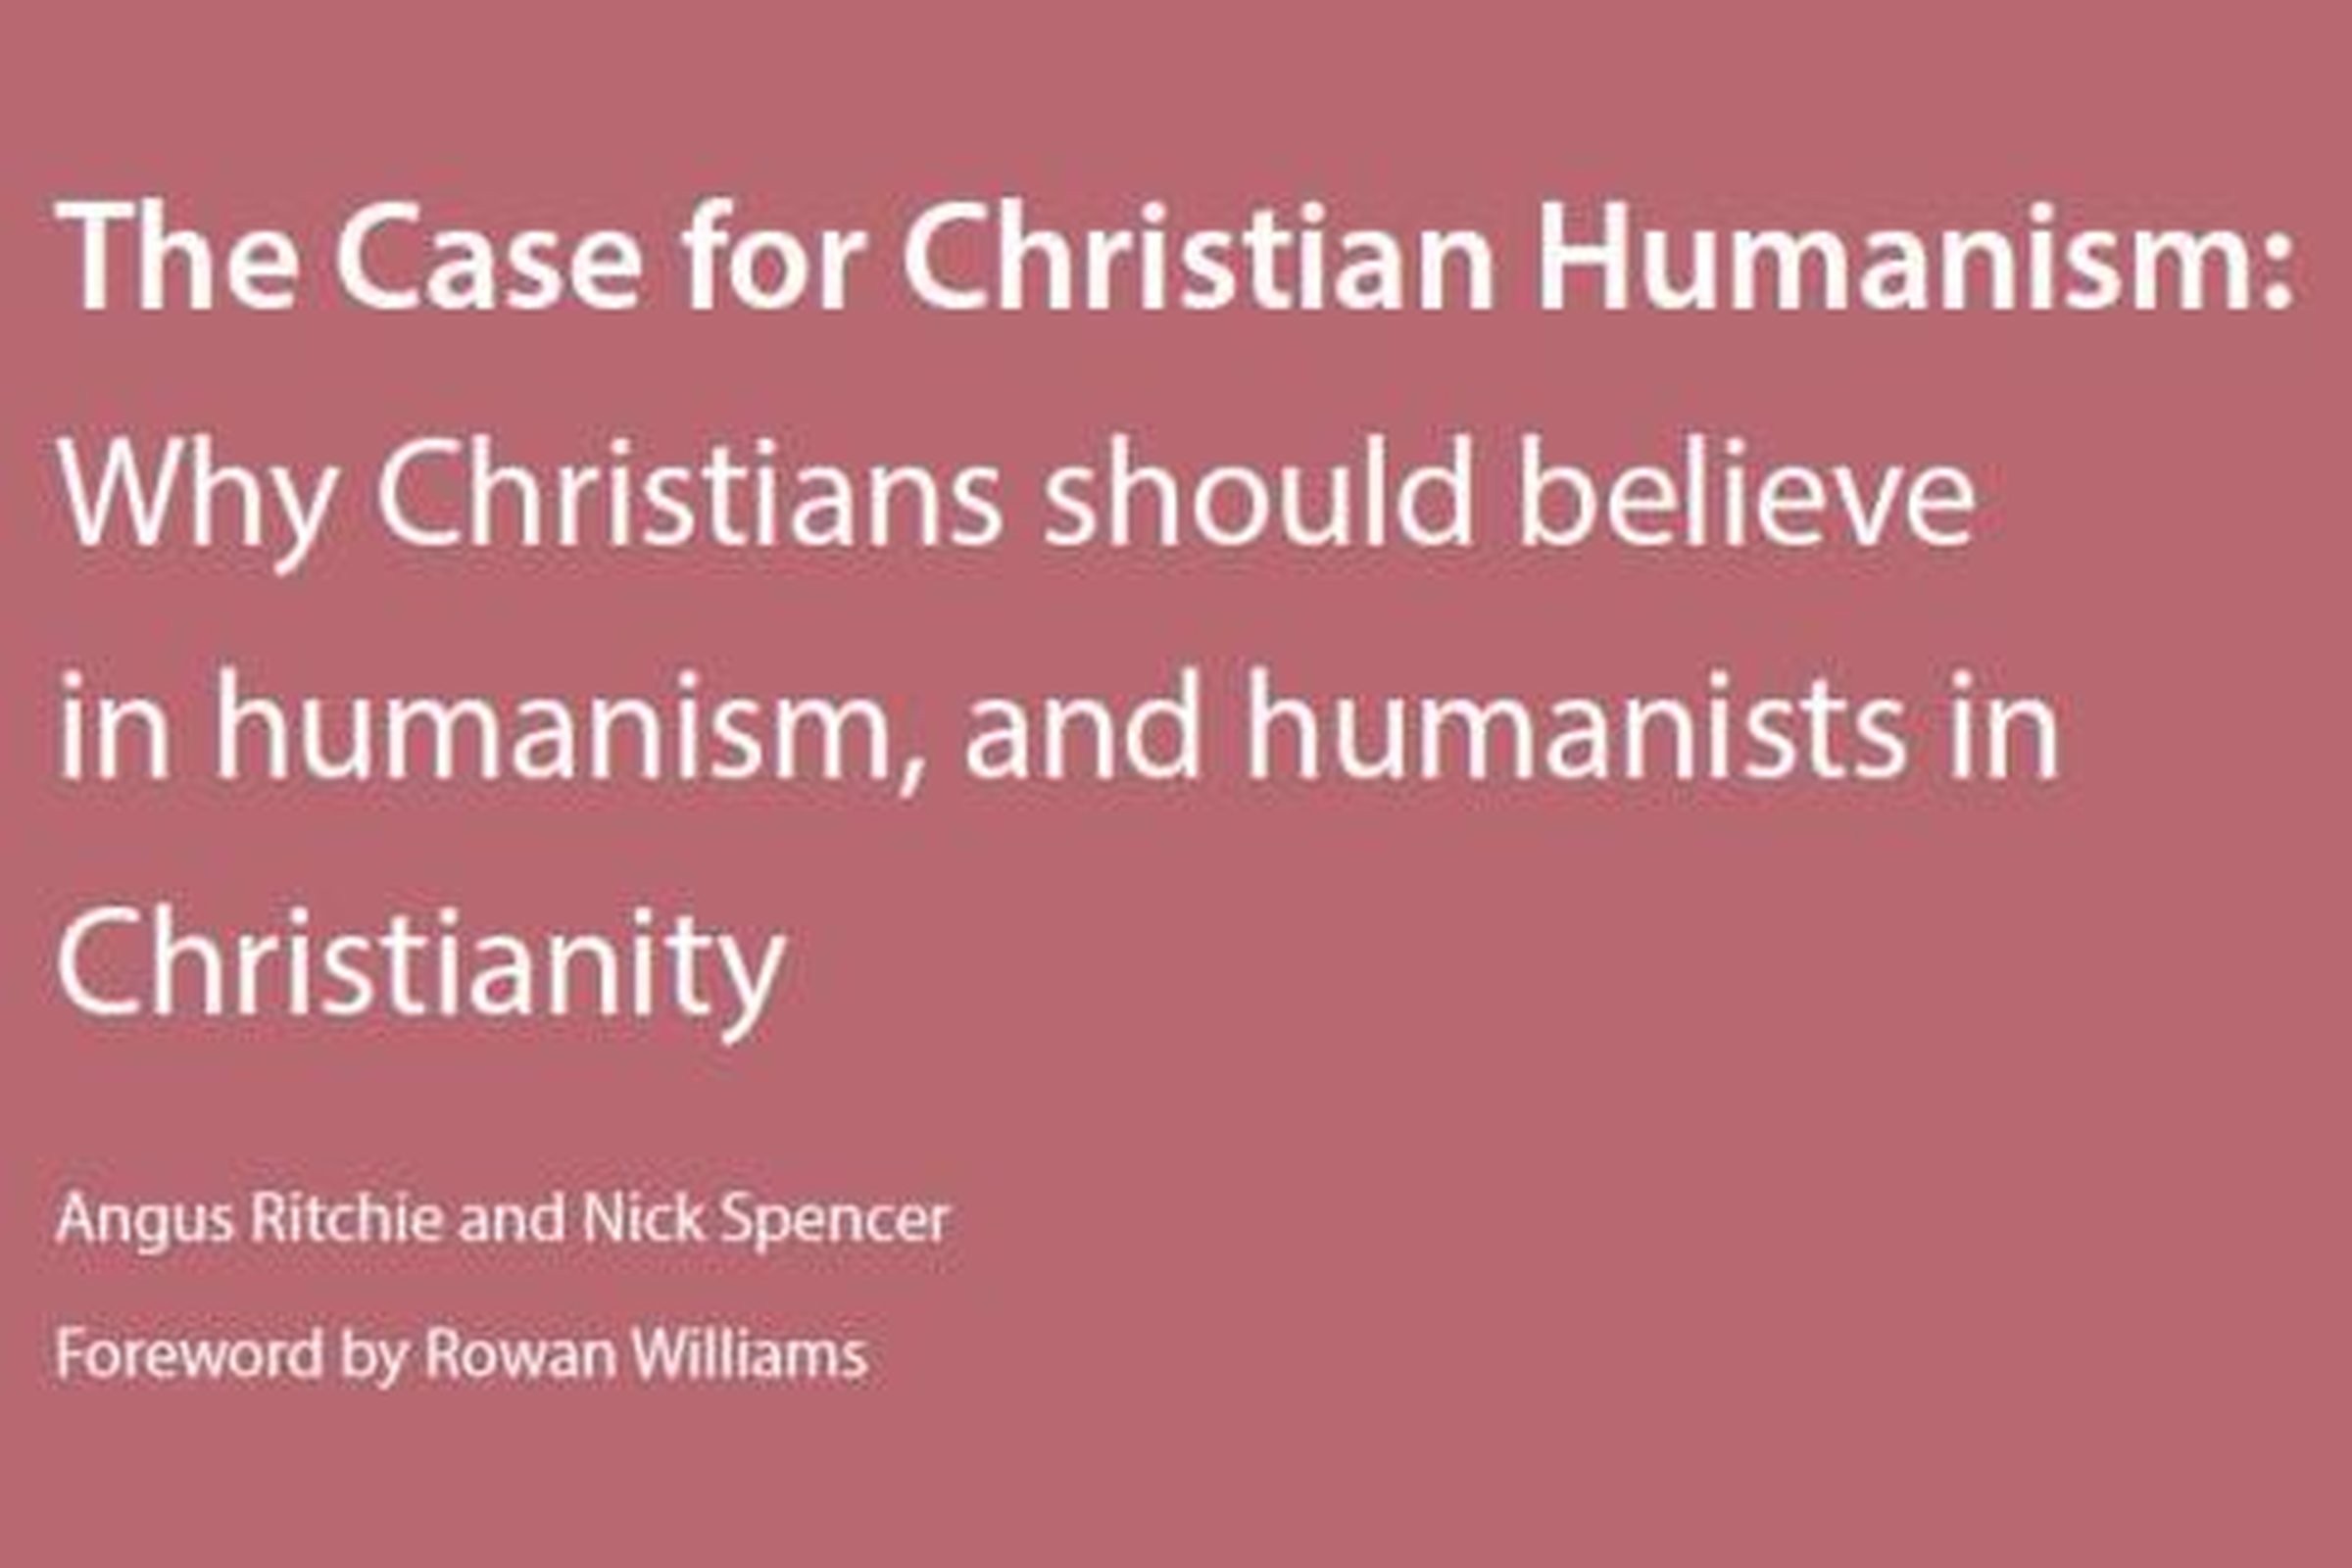 Humanism needs Christianity says religious think tank